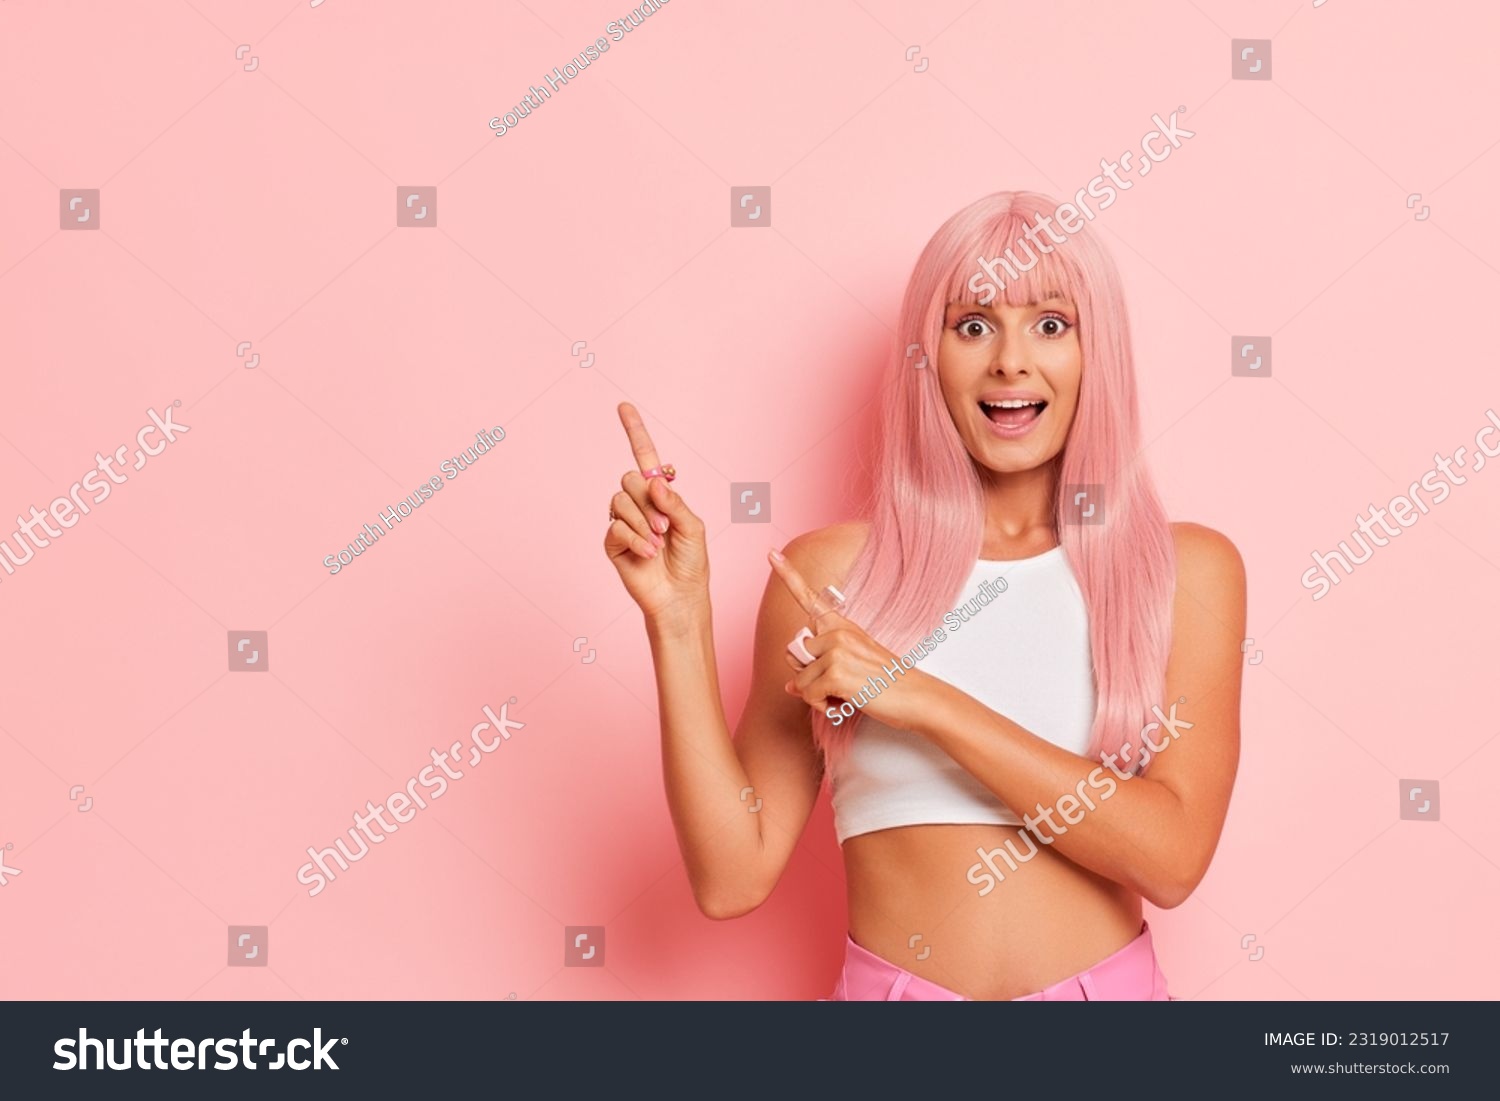 Young pretty woman stands against pink background, pointing index fingers aside with smile, wearing white top, pleasure concept, copy space #2319012517